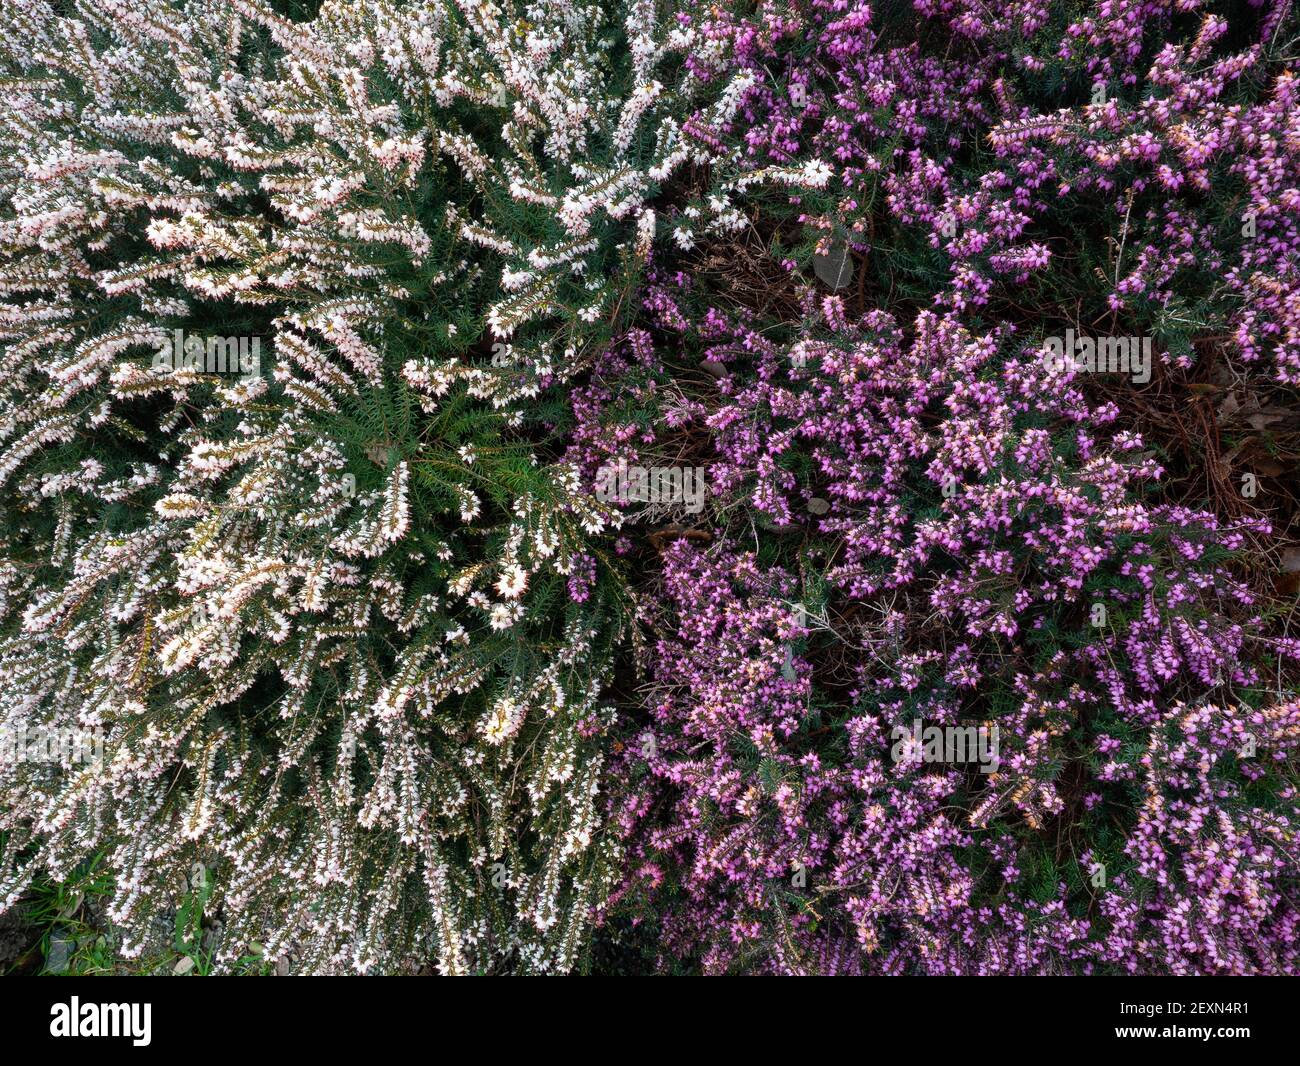 heather plants with white and pink flowers viewed from above Stock Photo